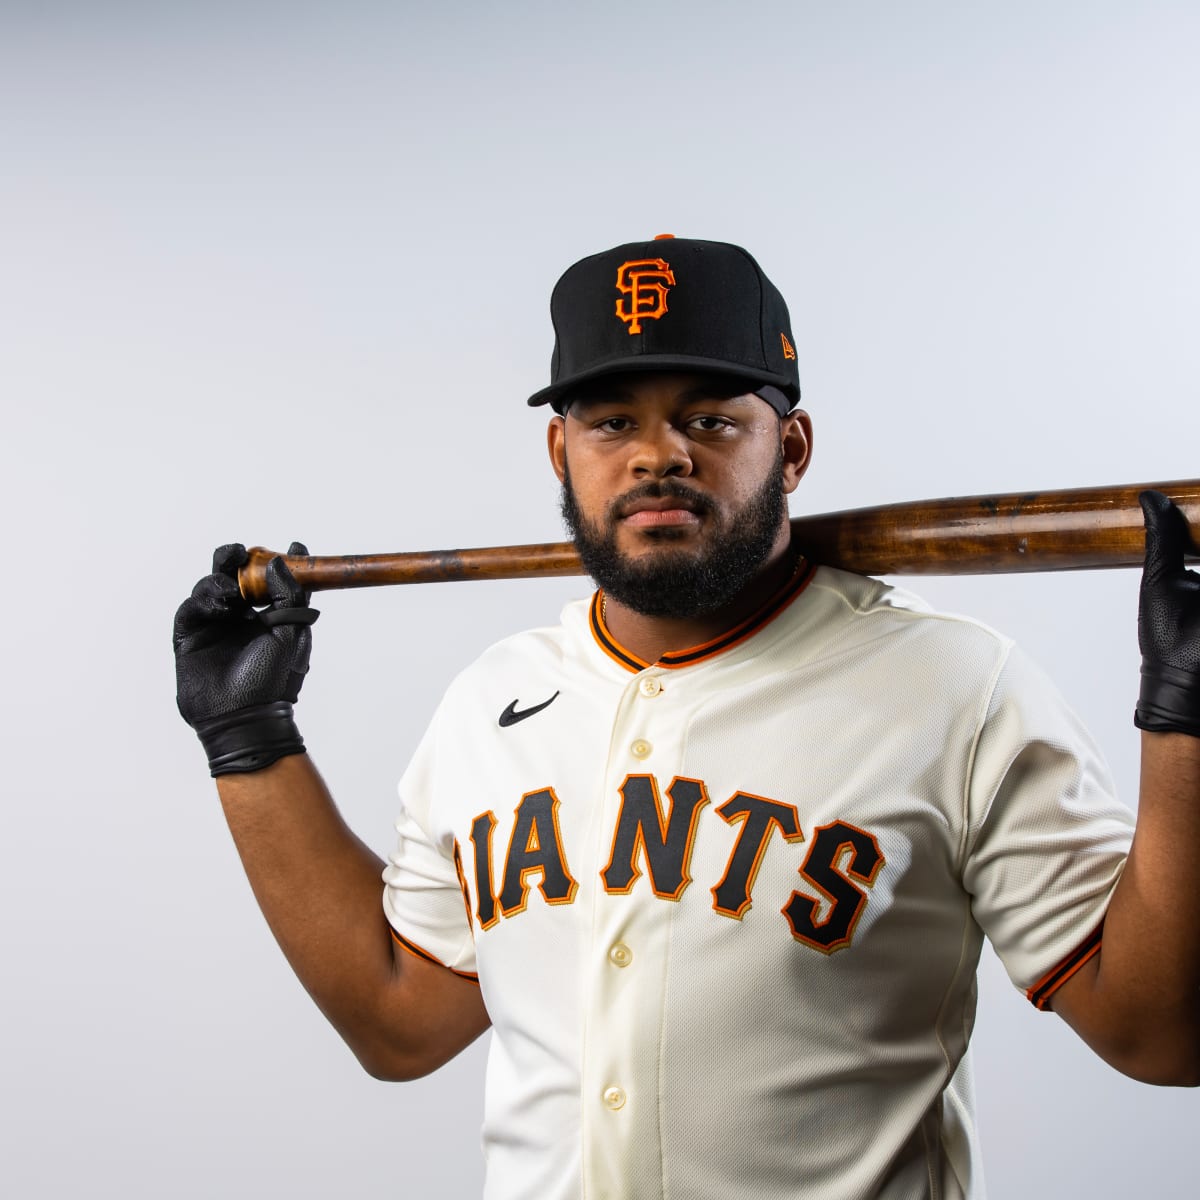 This isn't Heliot Ramos' last chance with the Giants - The Athletic